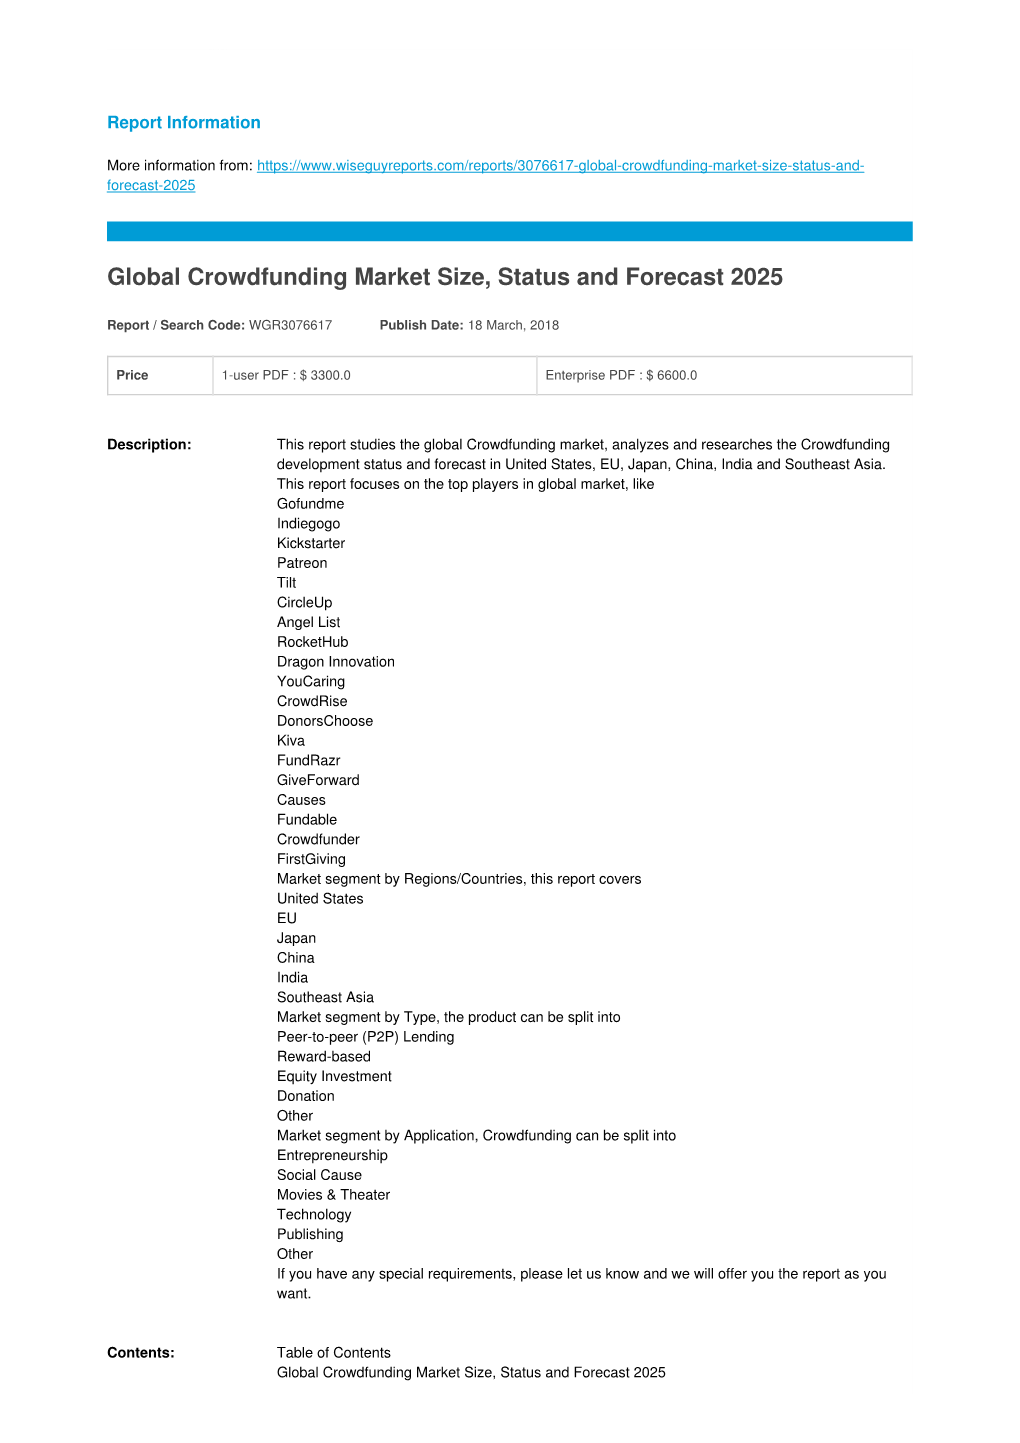 Global Crowdfunding Market Size, Status and Forecast 2025